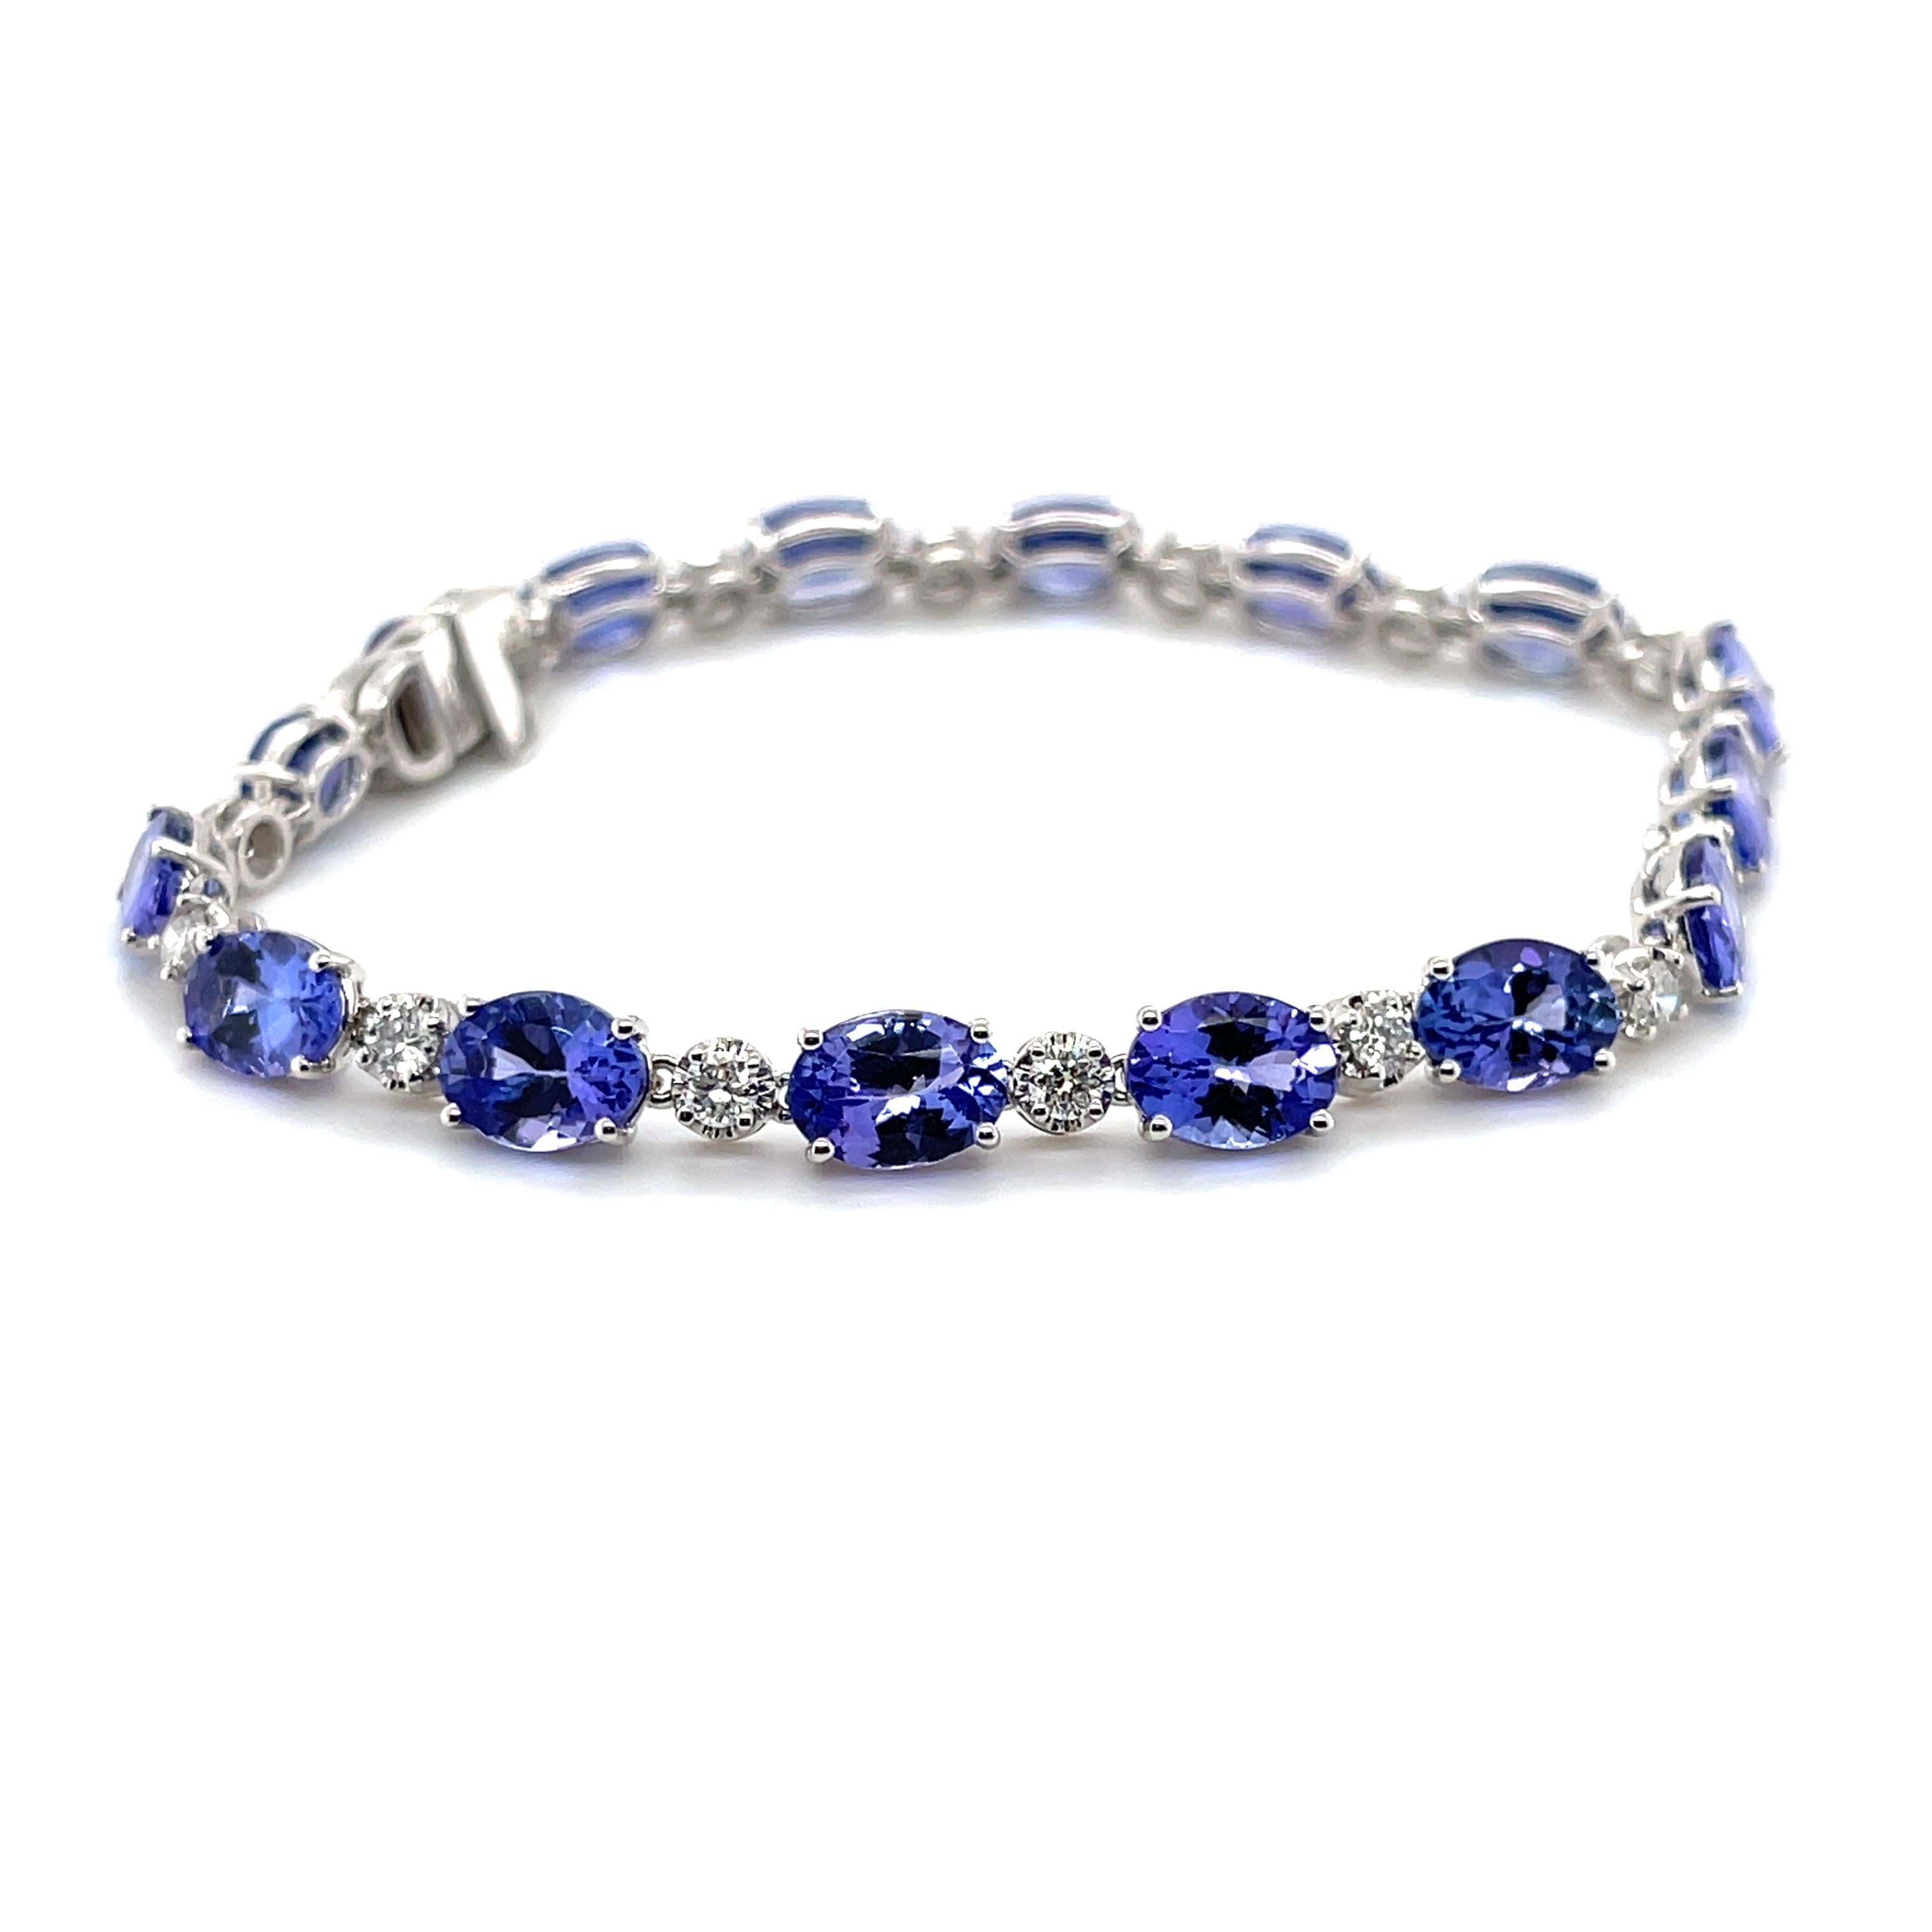 Oval shaped tanzanites, crafted with eighteen karat white gold, featuring sixteen claw set natural round brilliant cut diamonds, also sixteen claw set oval shaped natural tanzanites. complimented with a polished finish design.

Tanzanites weight: